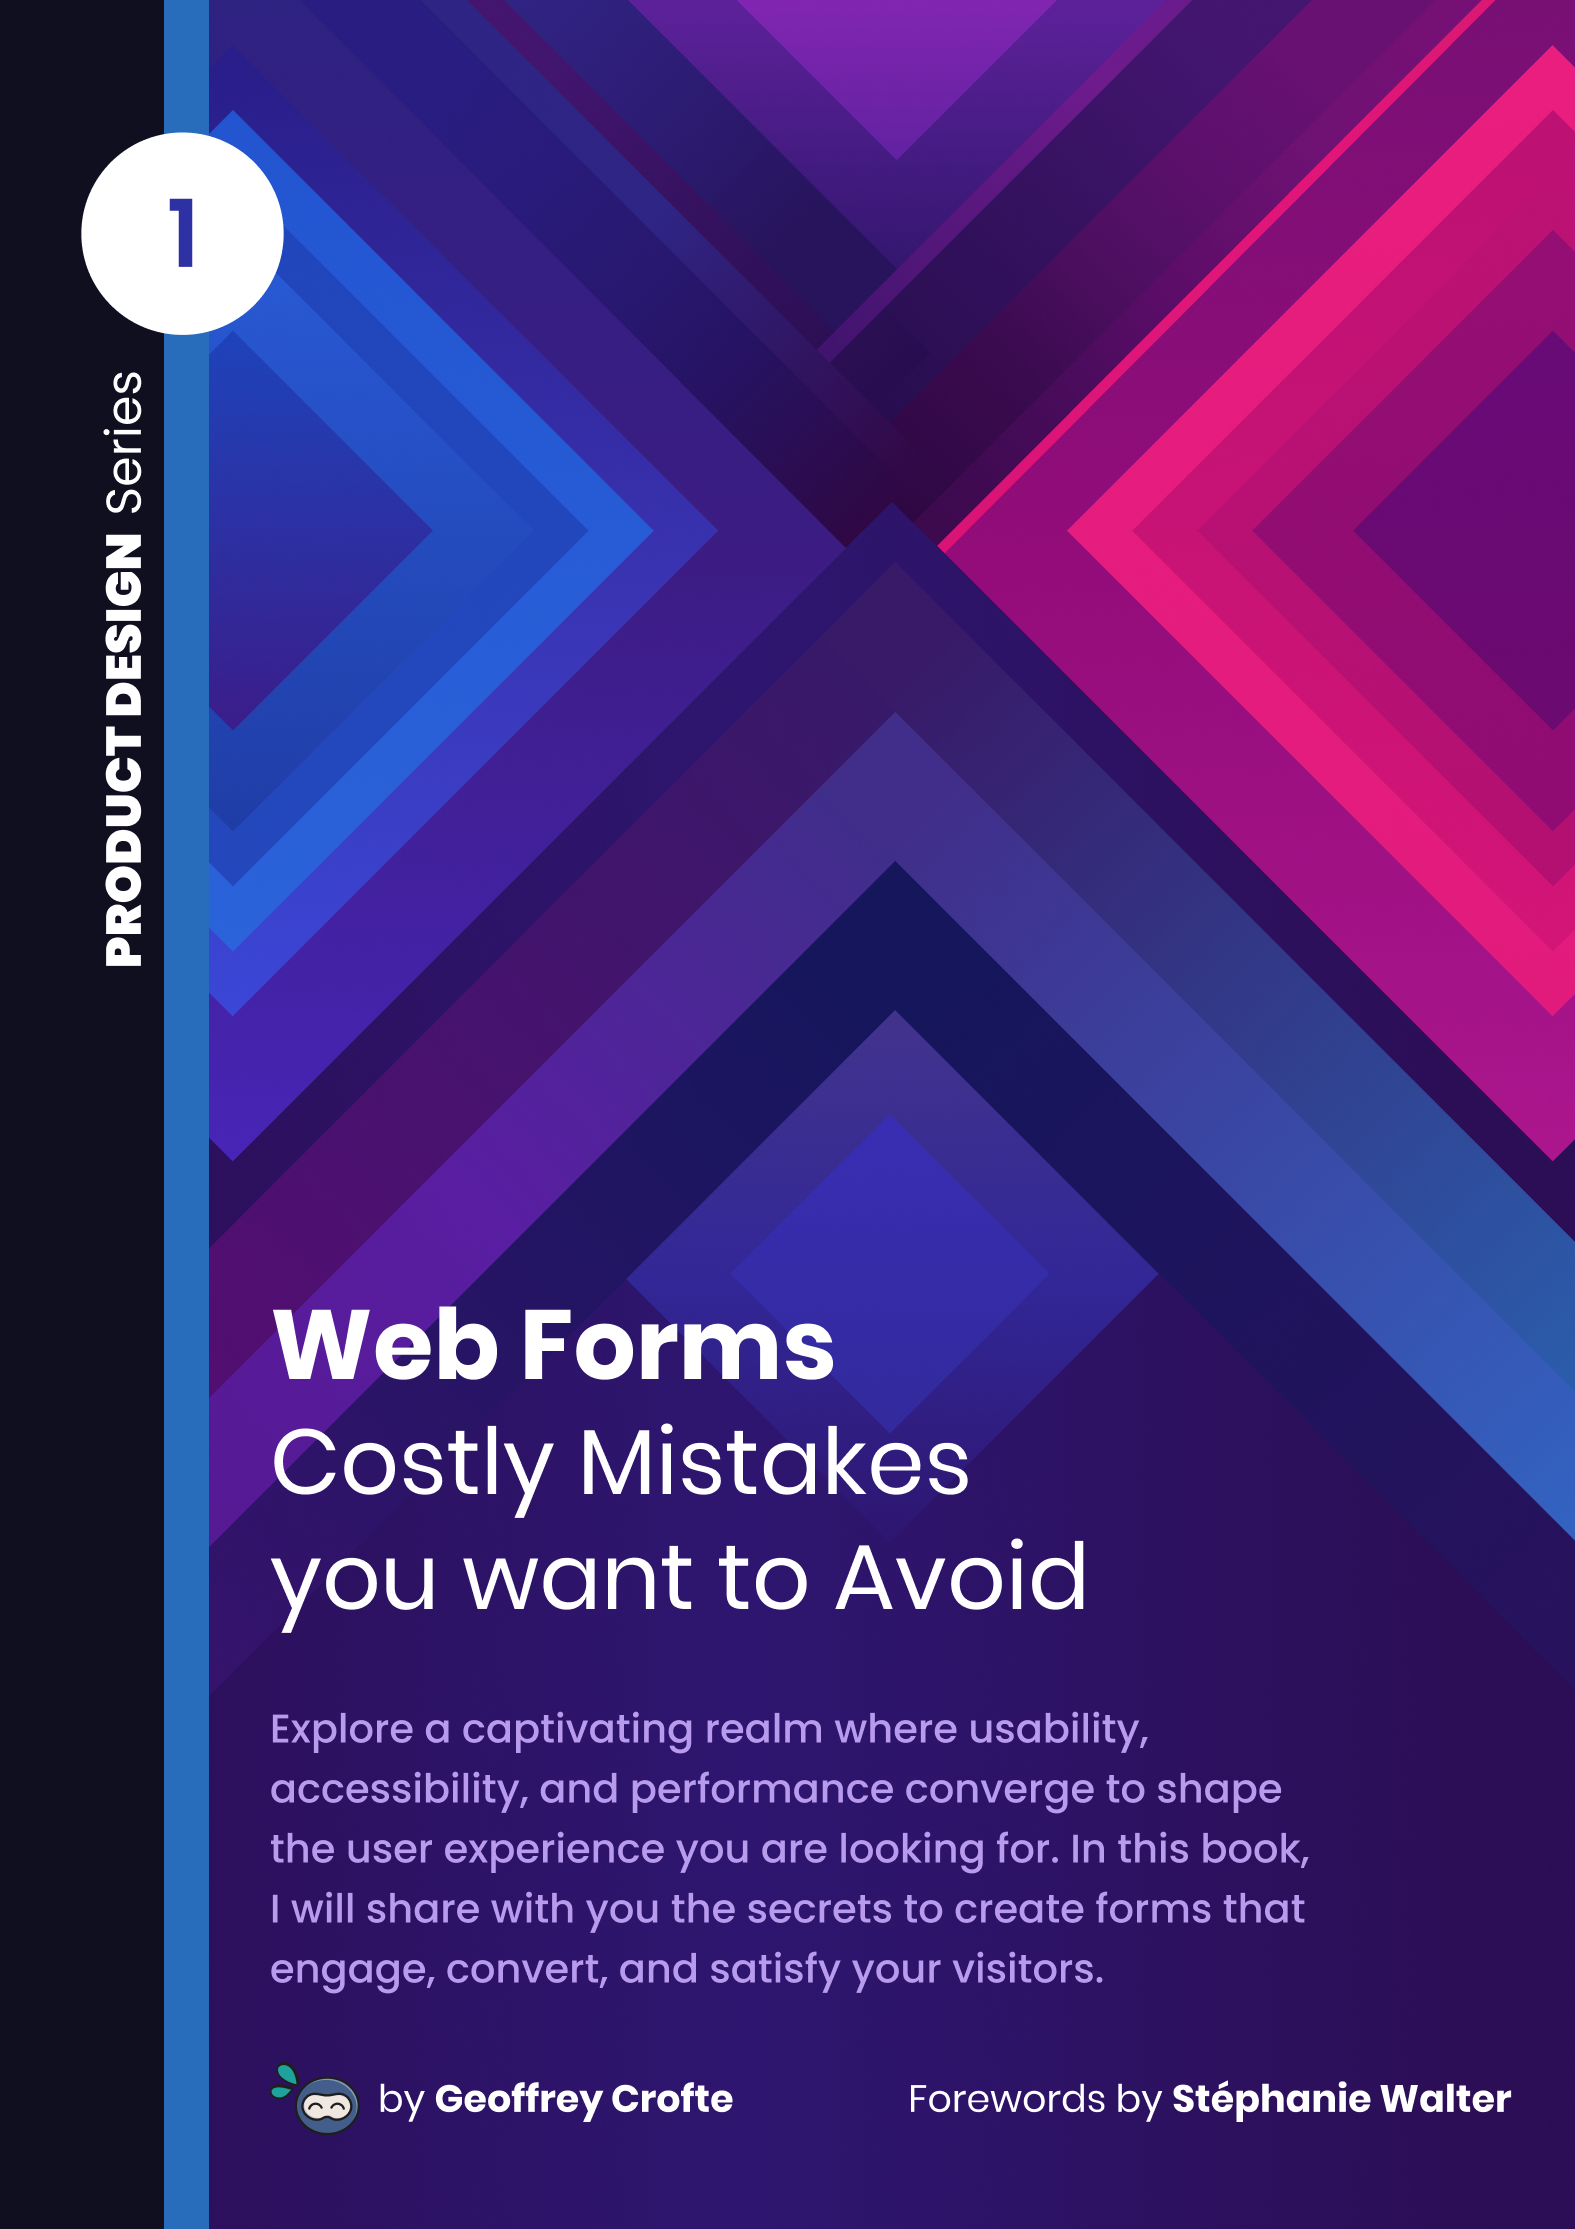 Web Forms: Costly Mistakes You Want to Avoid